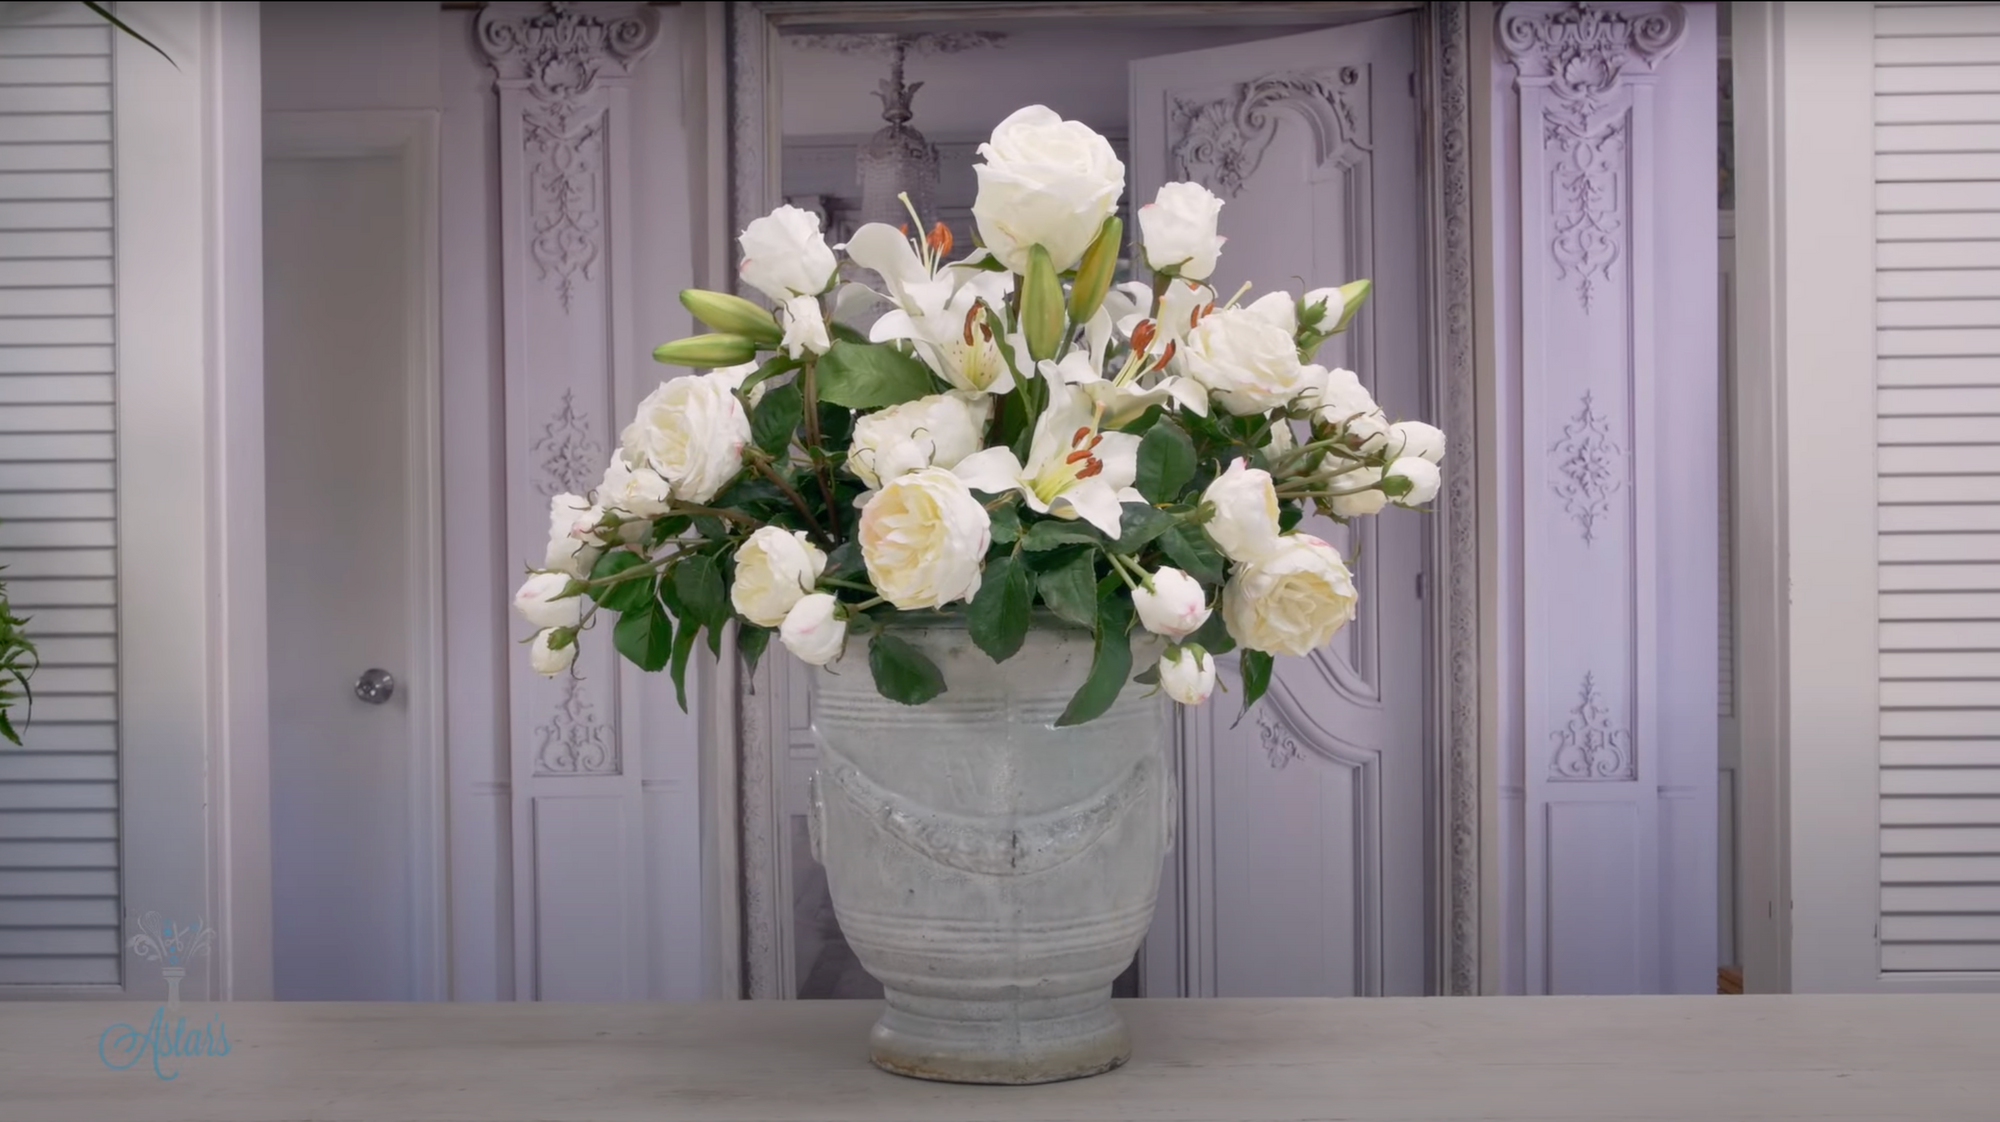 A Permanent Floral Design of White roses and Lilies